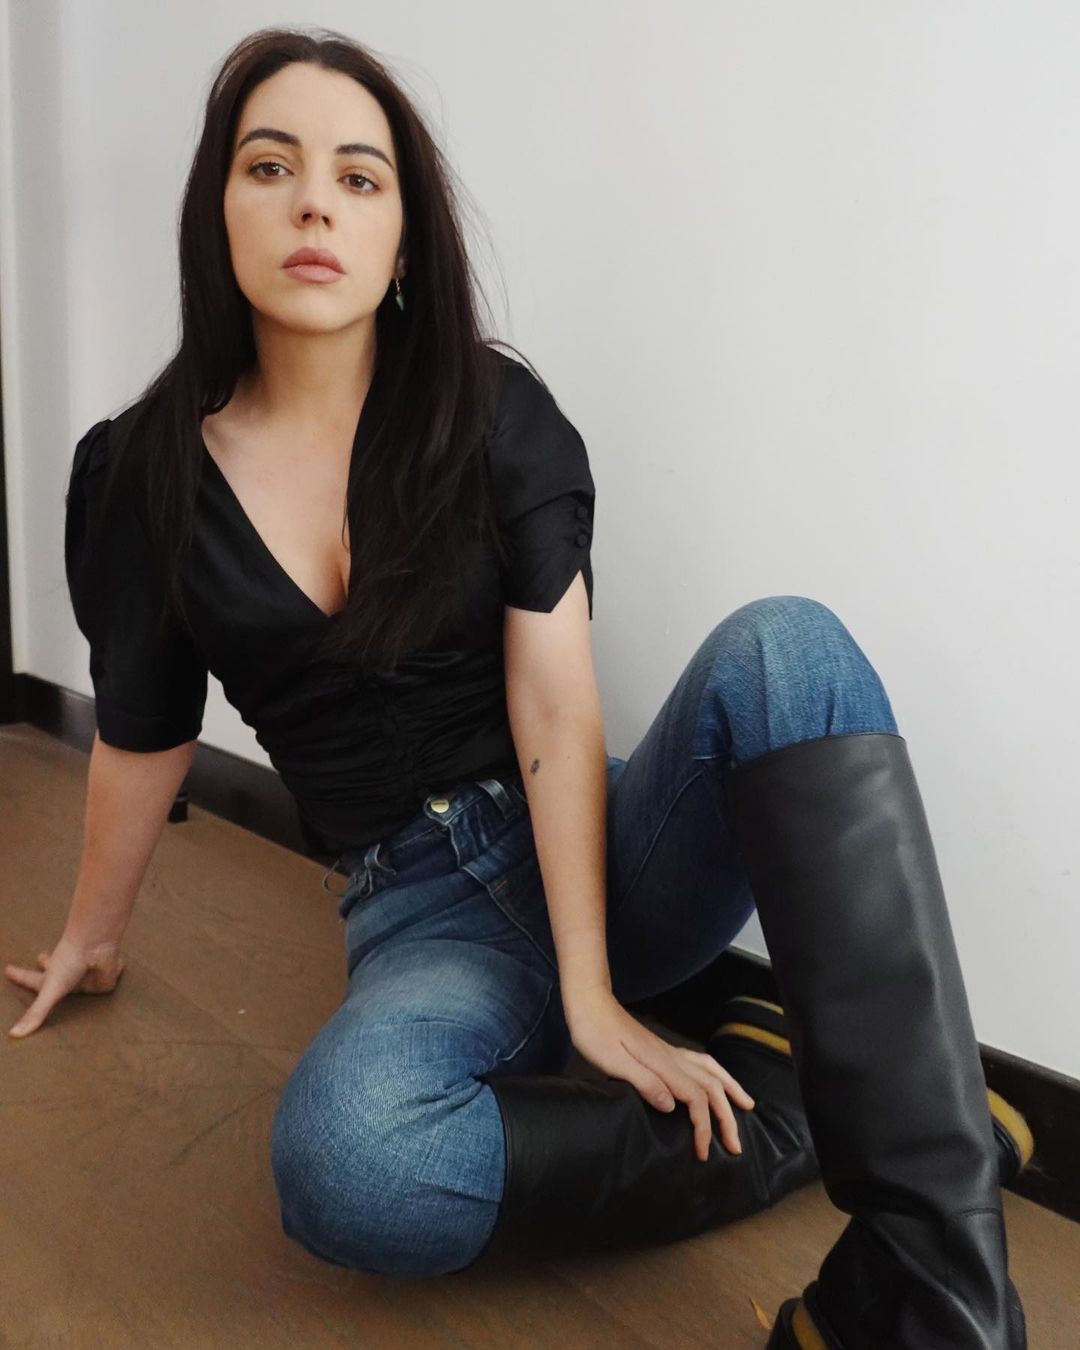 adelaide kane — adelaidekane Haven't felt cute in months (and